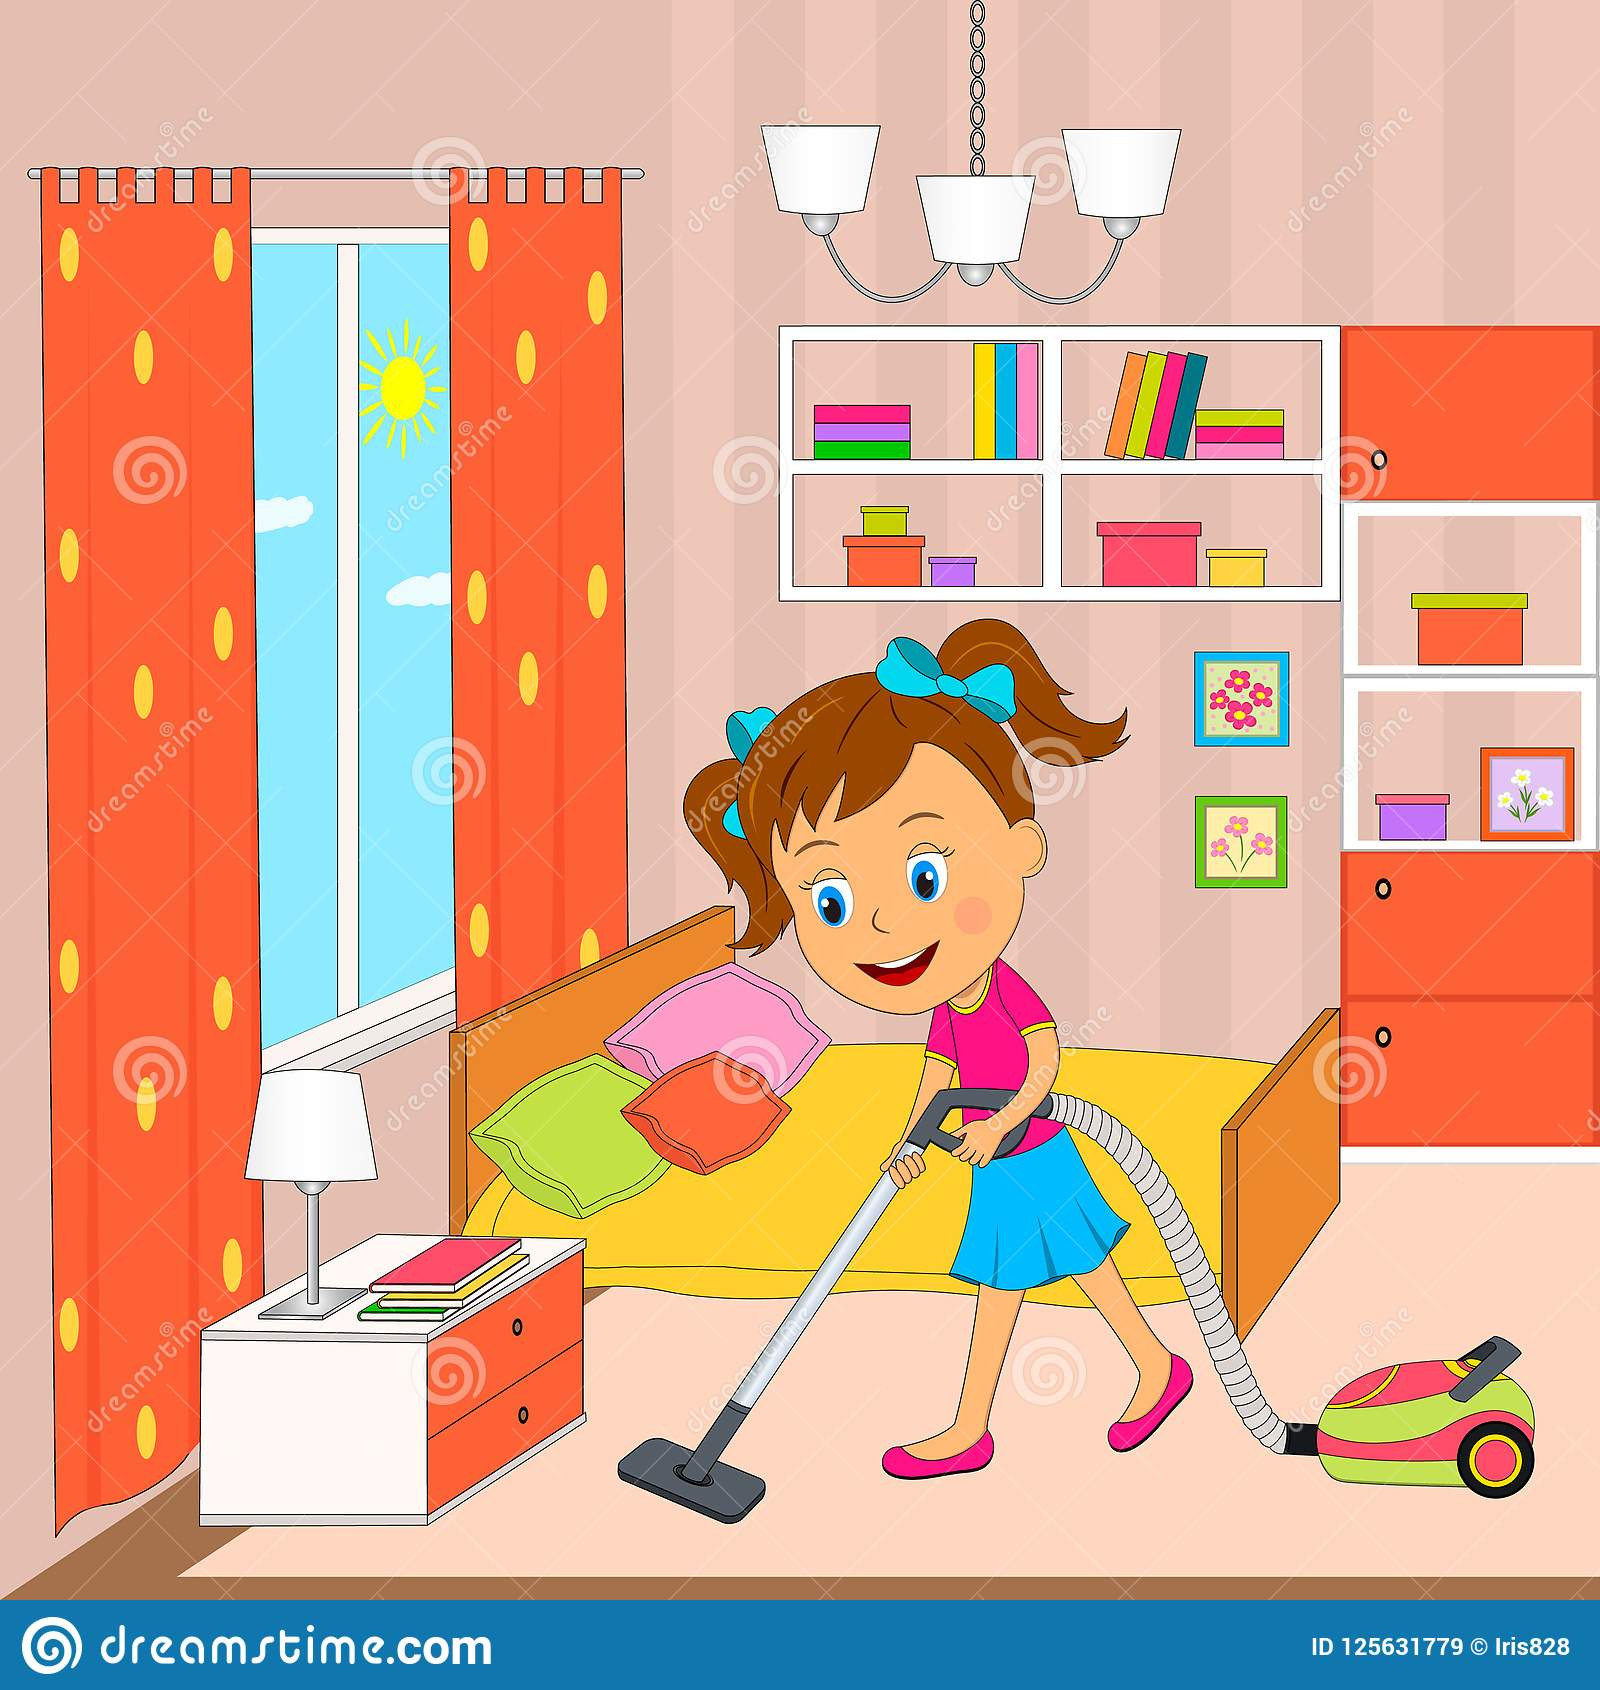 Kids Clean Room Clipart
 Cleaning Bedroom Stock Illustrations – 281 Cleaning